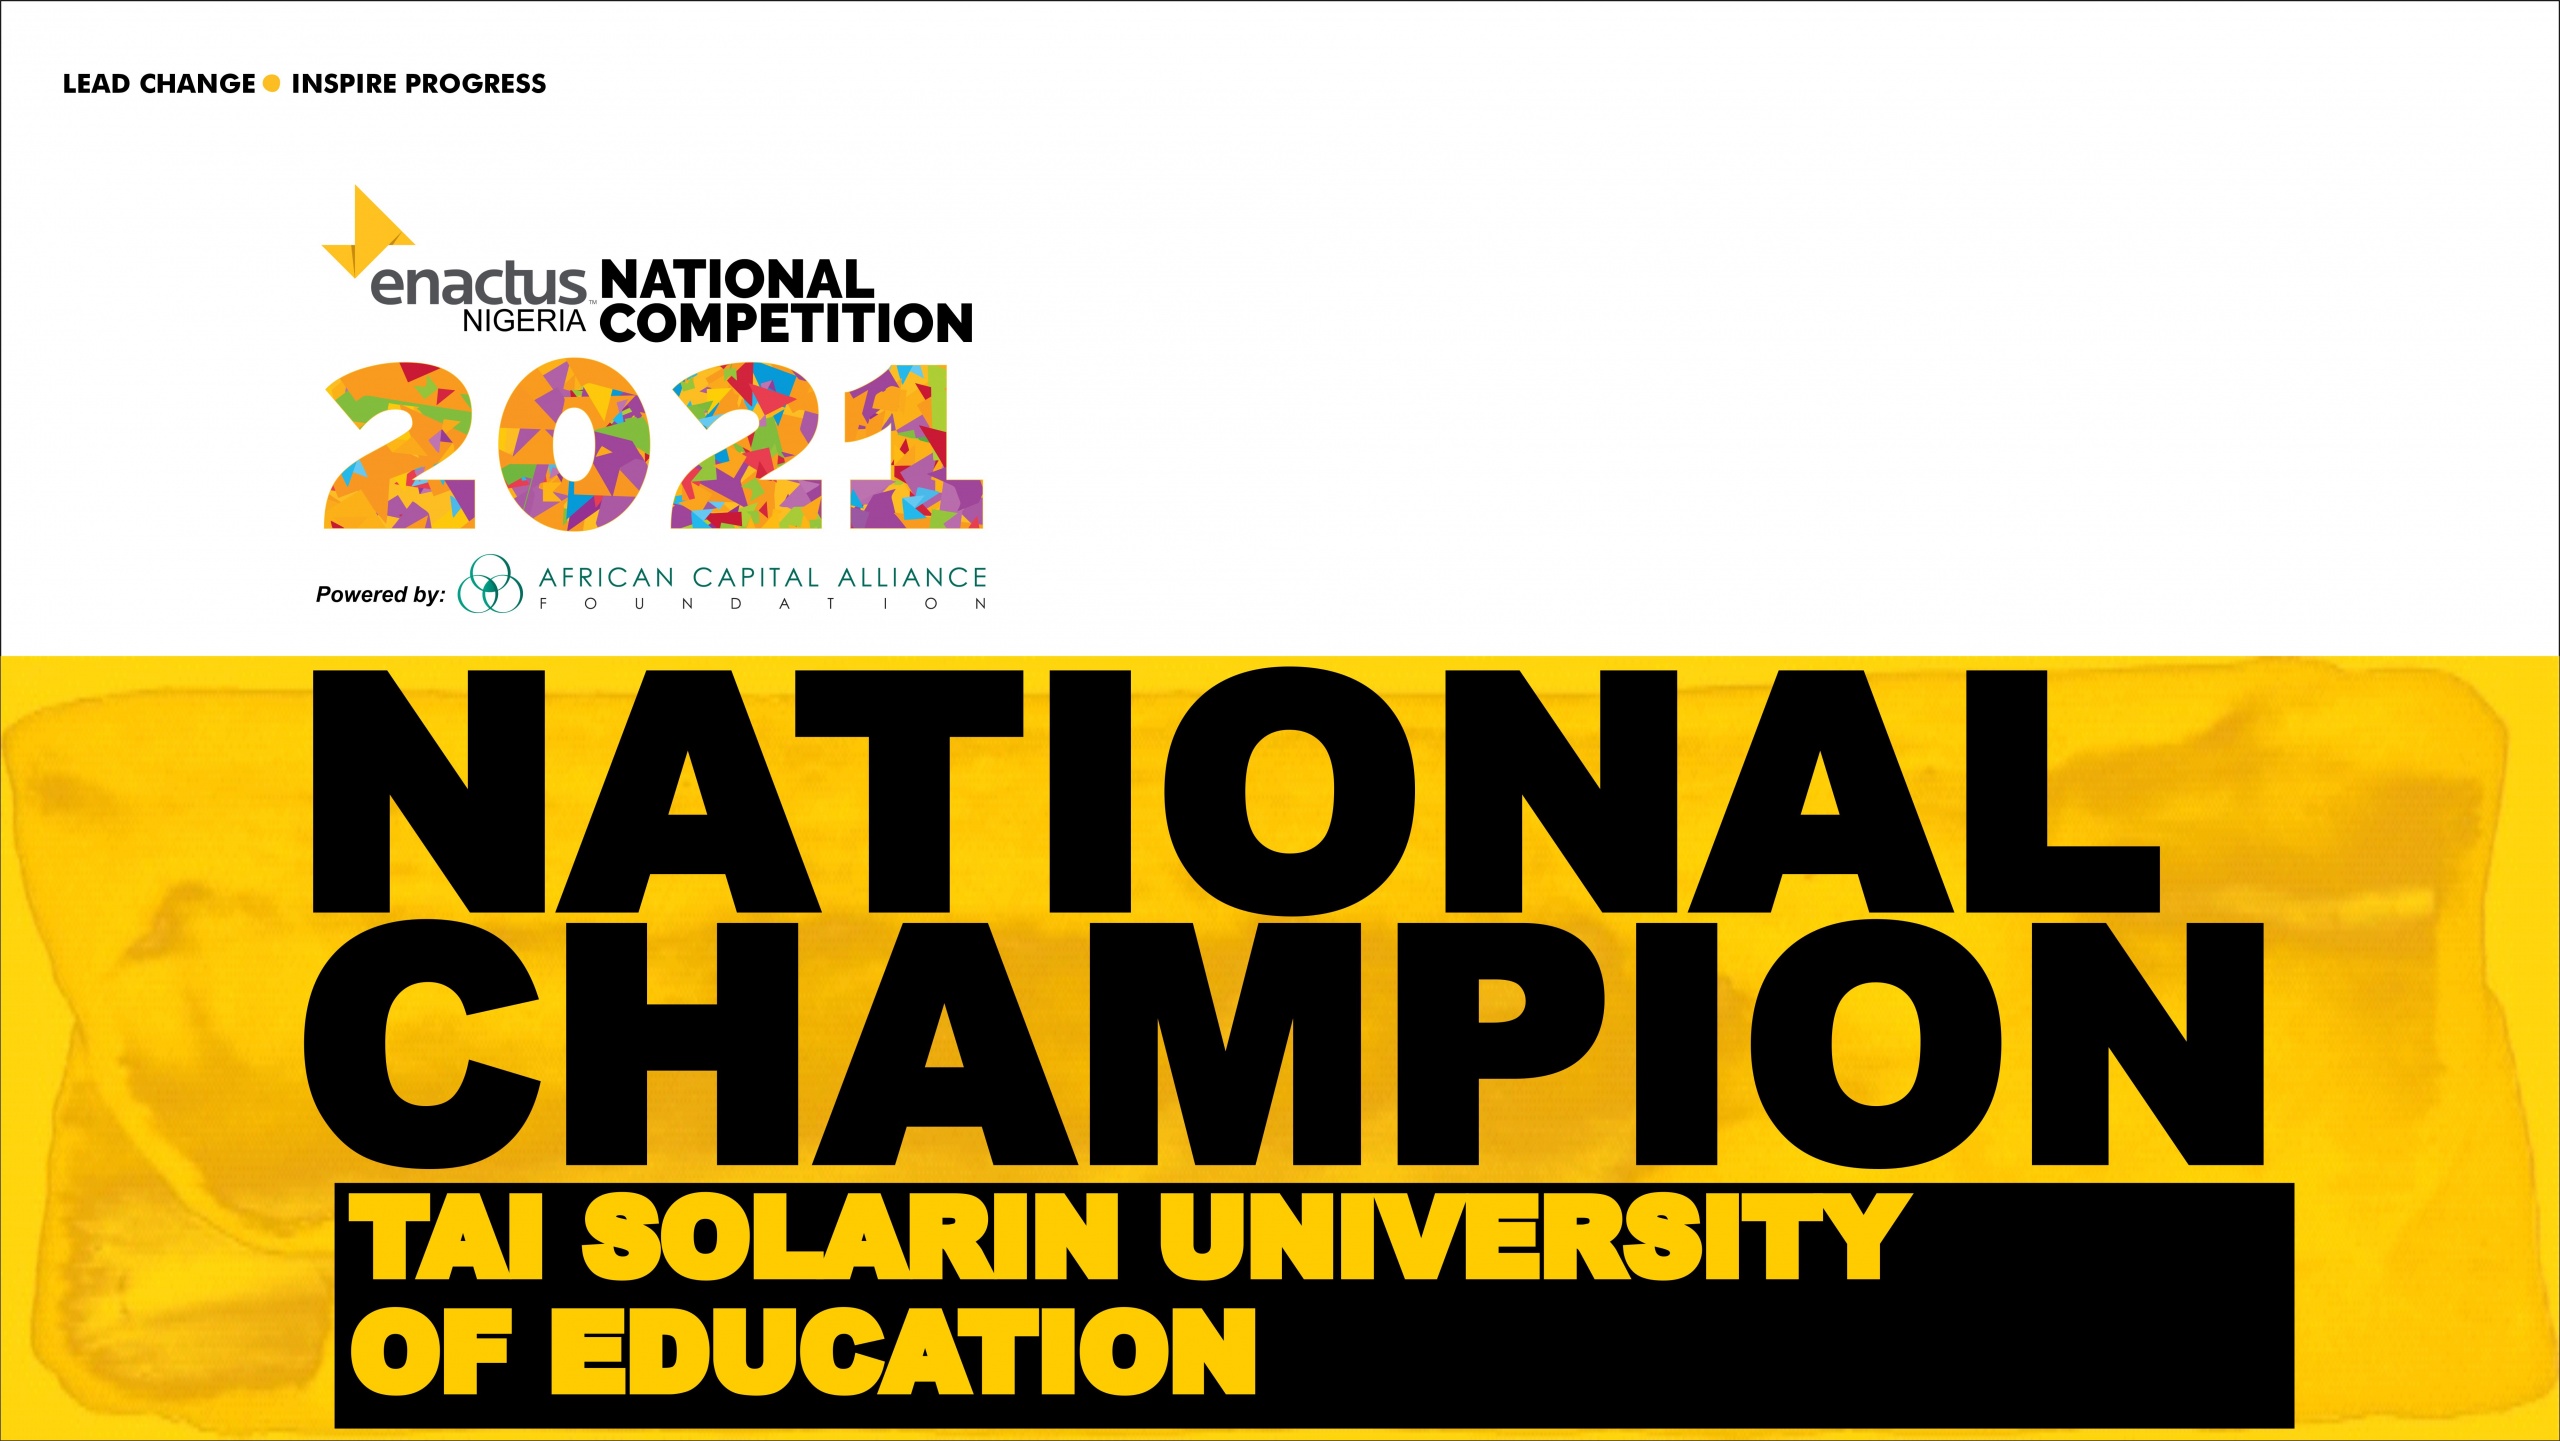 The Enactus Tai Solarin University of Education on emerging the National Champion of the Enactus Nigeria National Competition 2021.